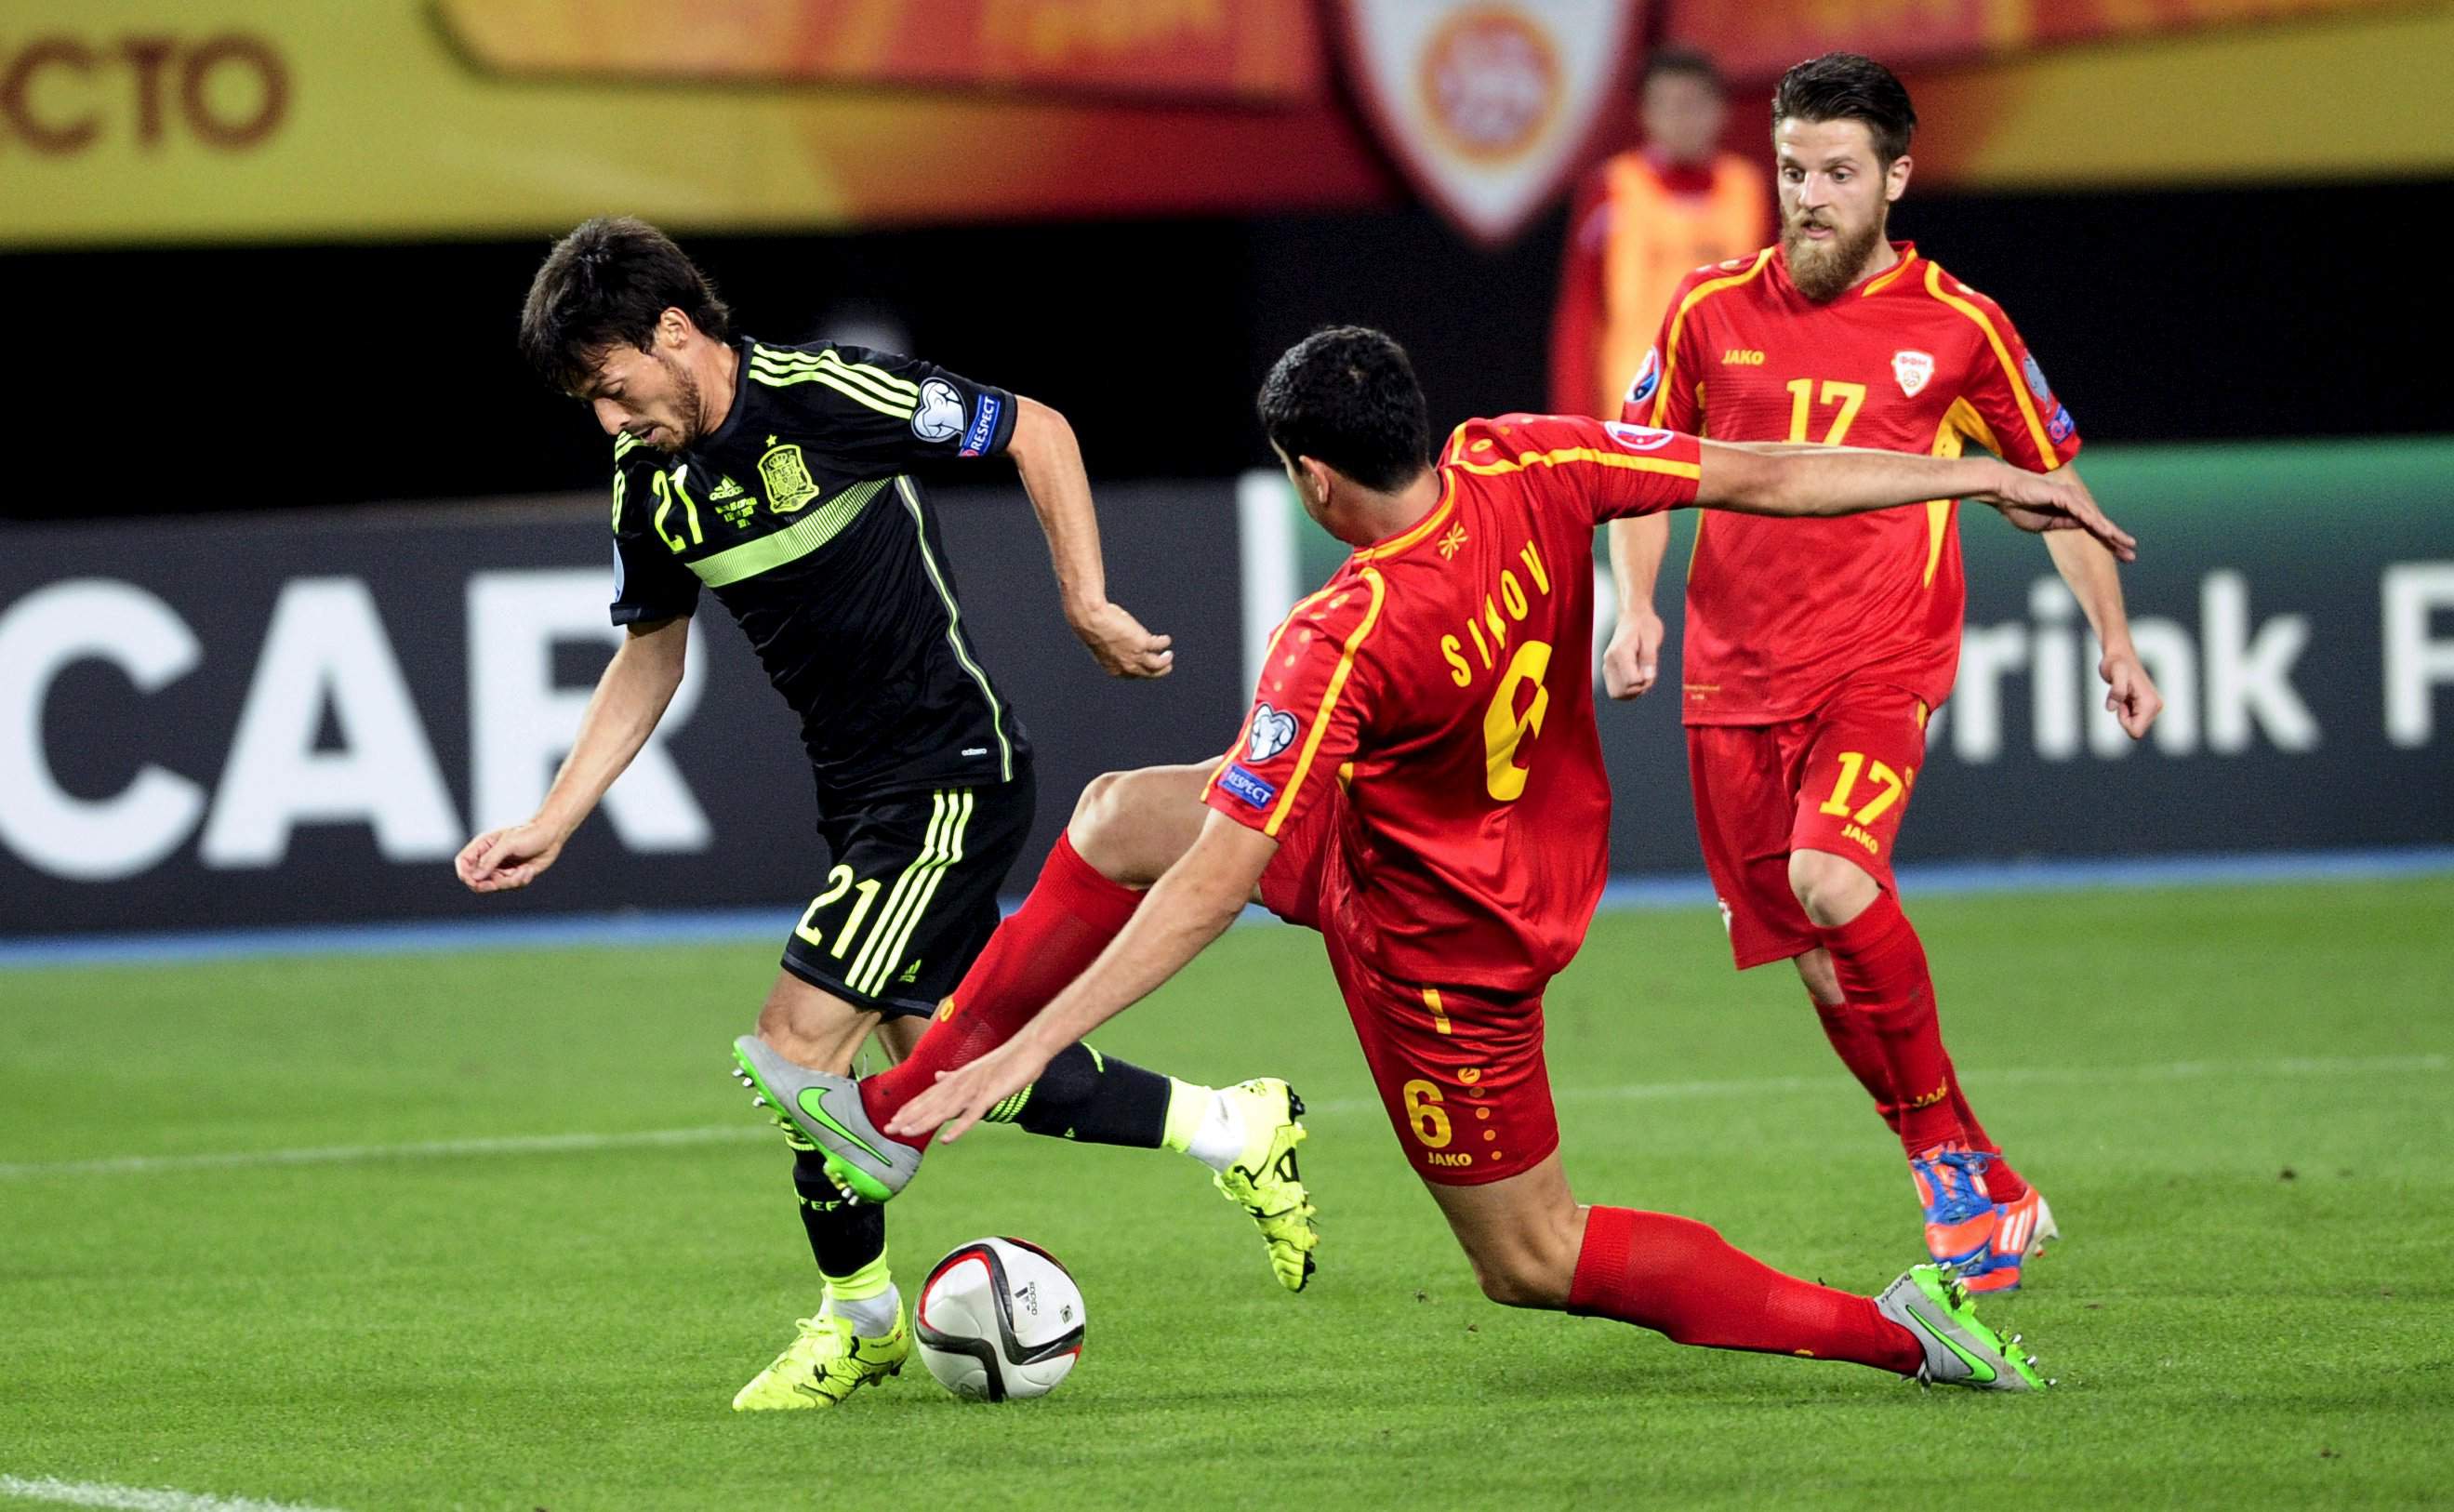 Spain David Silva  (L) fight for the ball with Macedonian Vance Shikov during their Euro 2016 qualification soccer match at Skopje city stadium ,Macedonia September 8,2015. REUTERS/Ognen Teofilovski